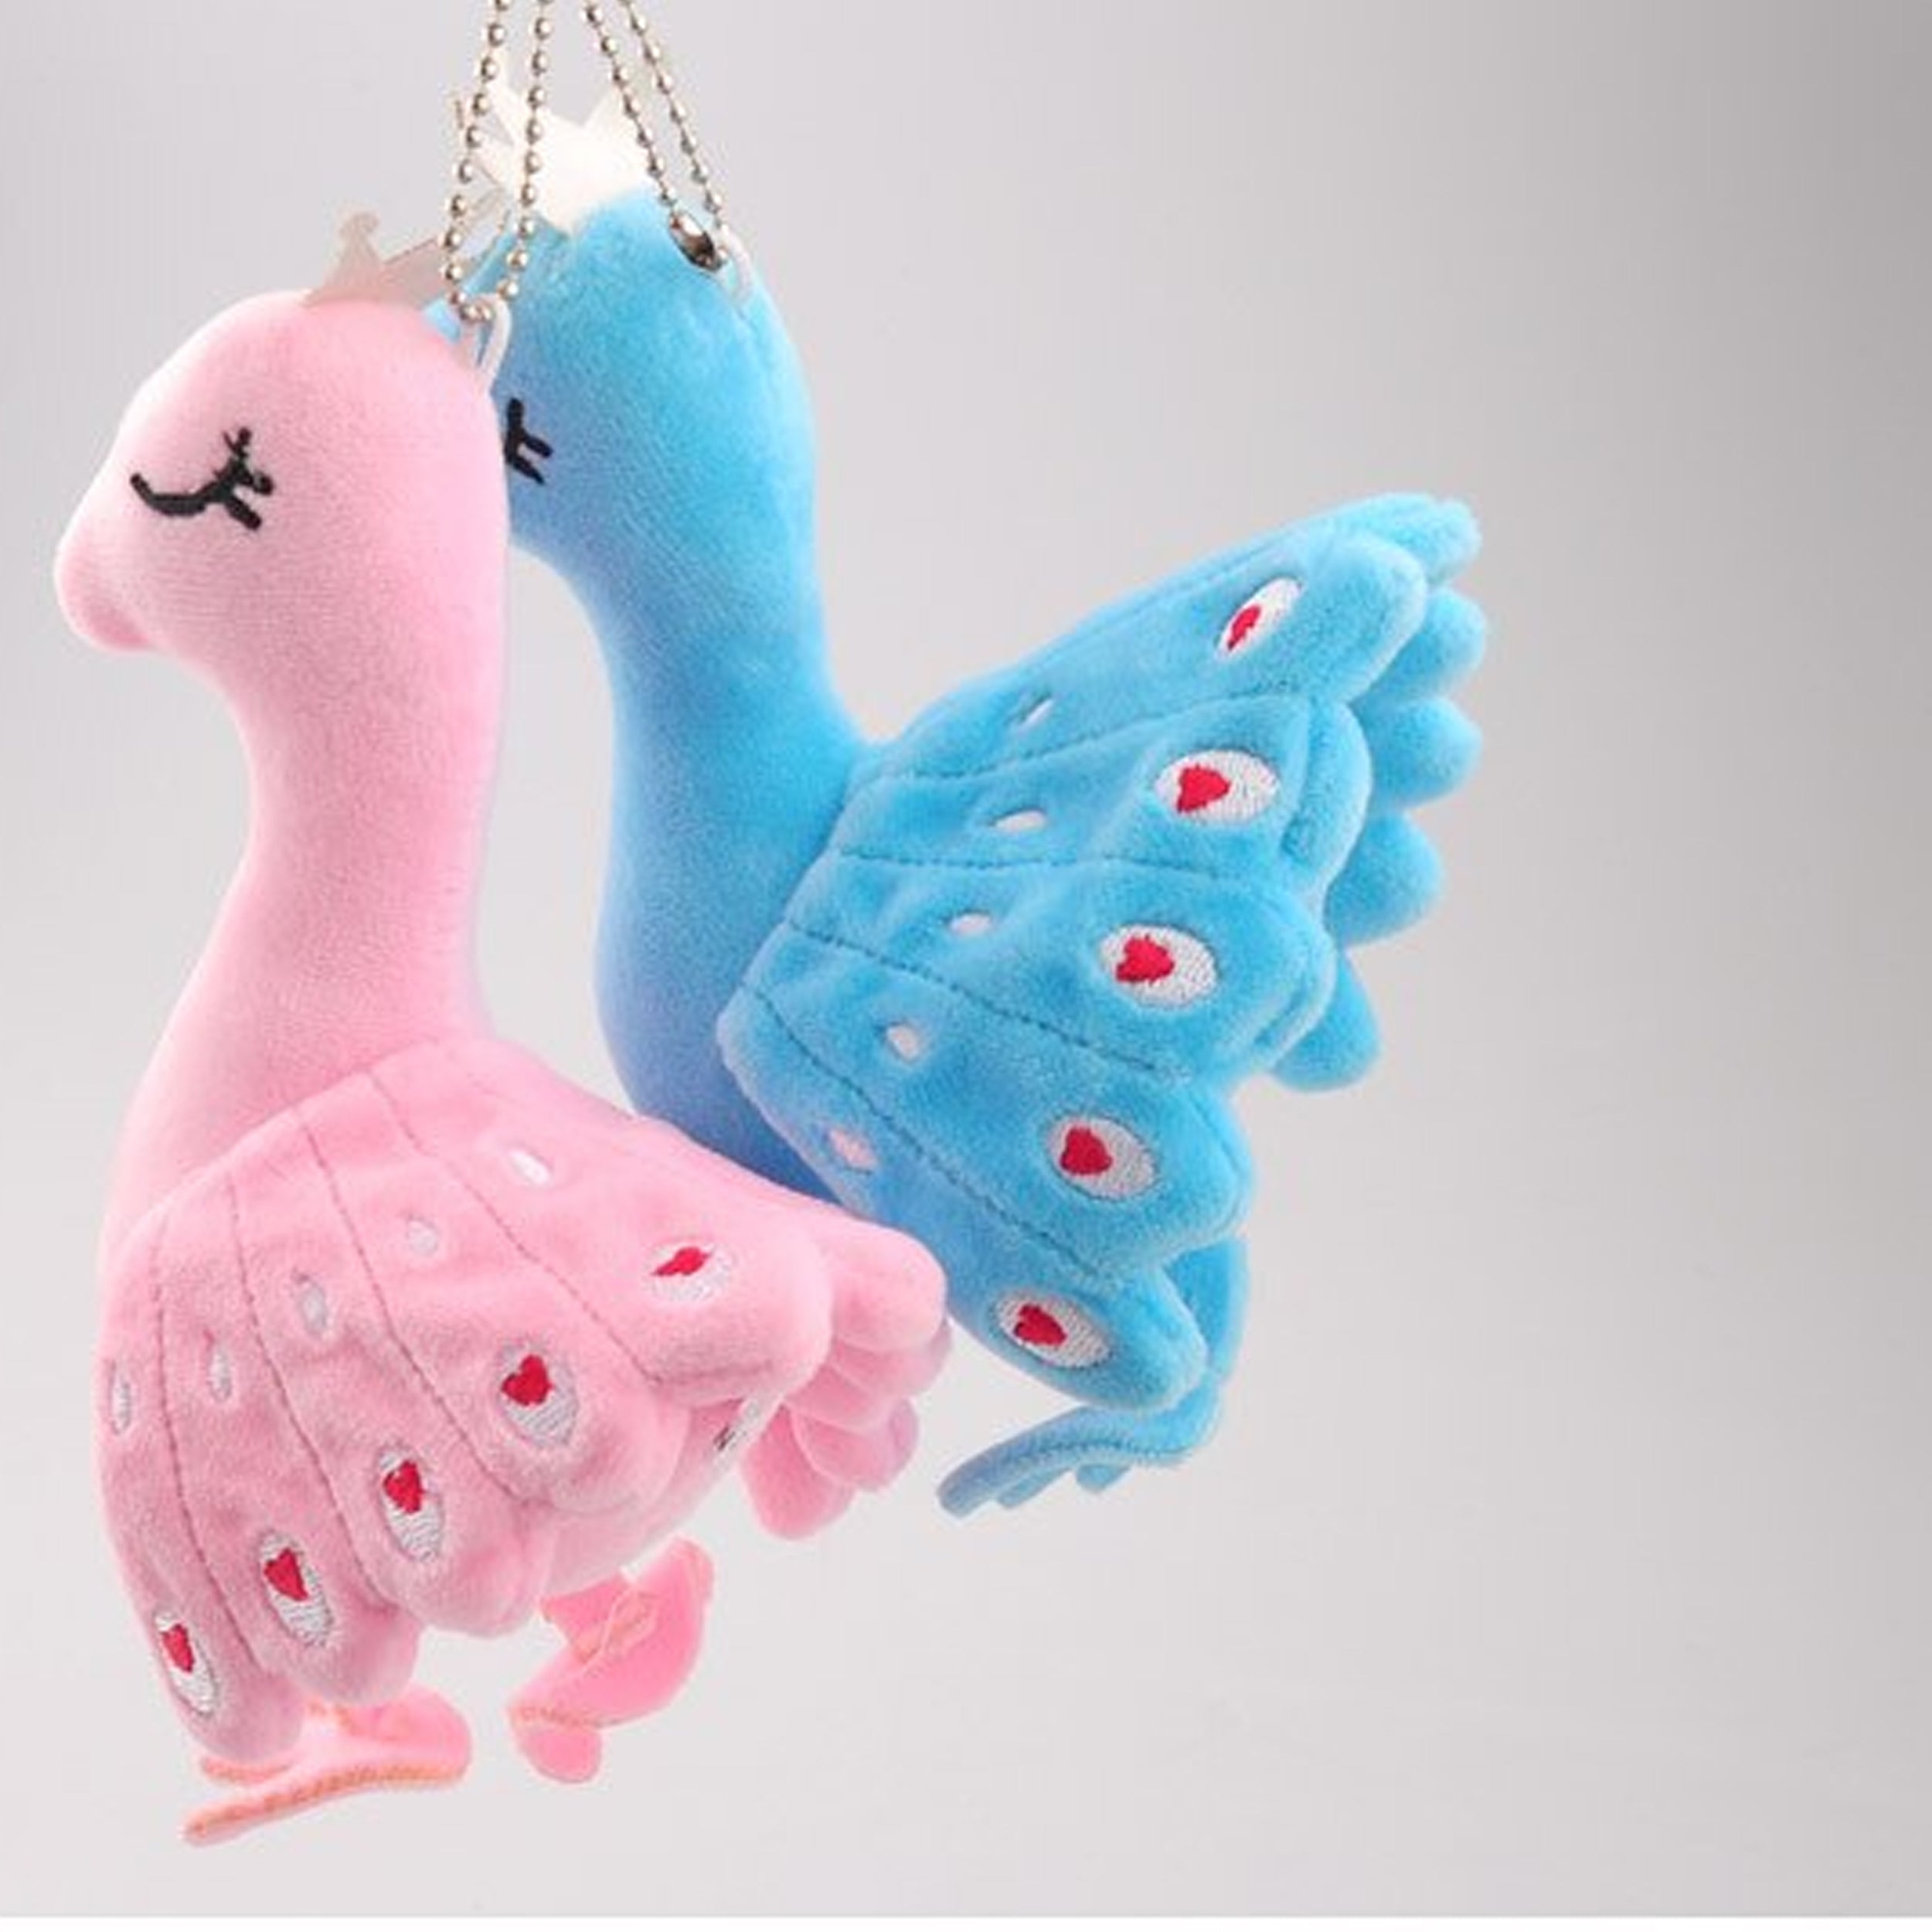 Add Some Color to Your Kid's Accessories with Our Beautiful Peacock Soft Plush Keychain Toy